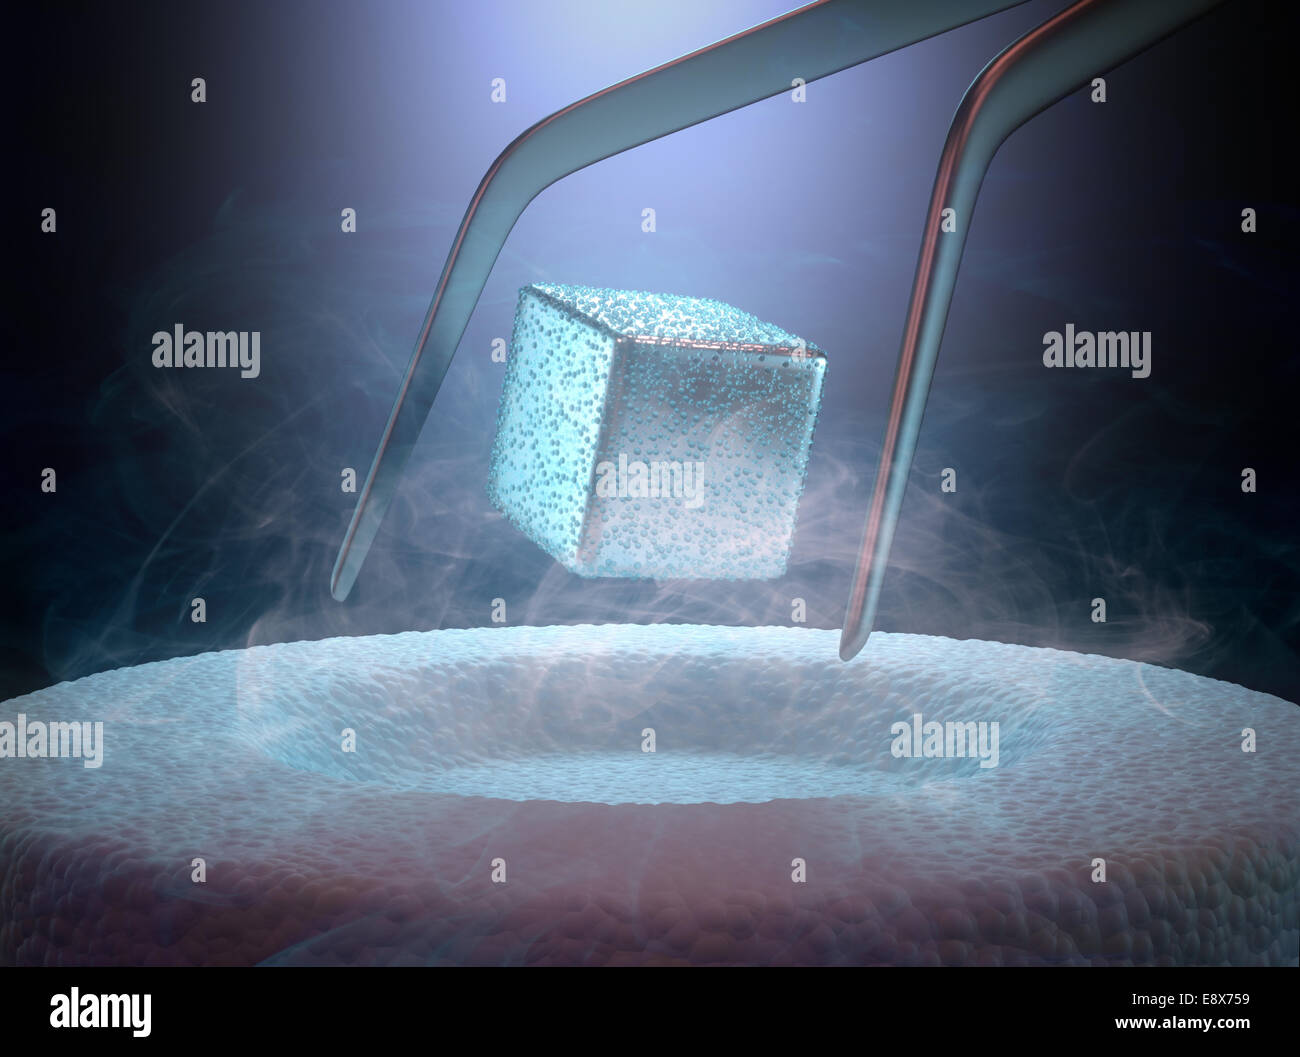 Image concept of magnetic levitating above a high-temperature superconductor, cooled with liquid nitrogen. Stock Photo